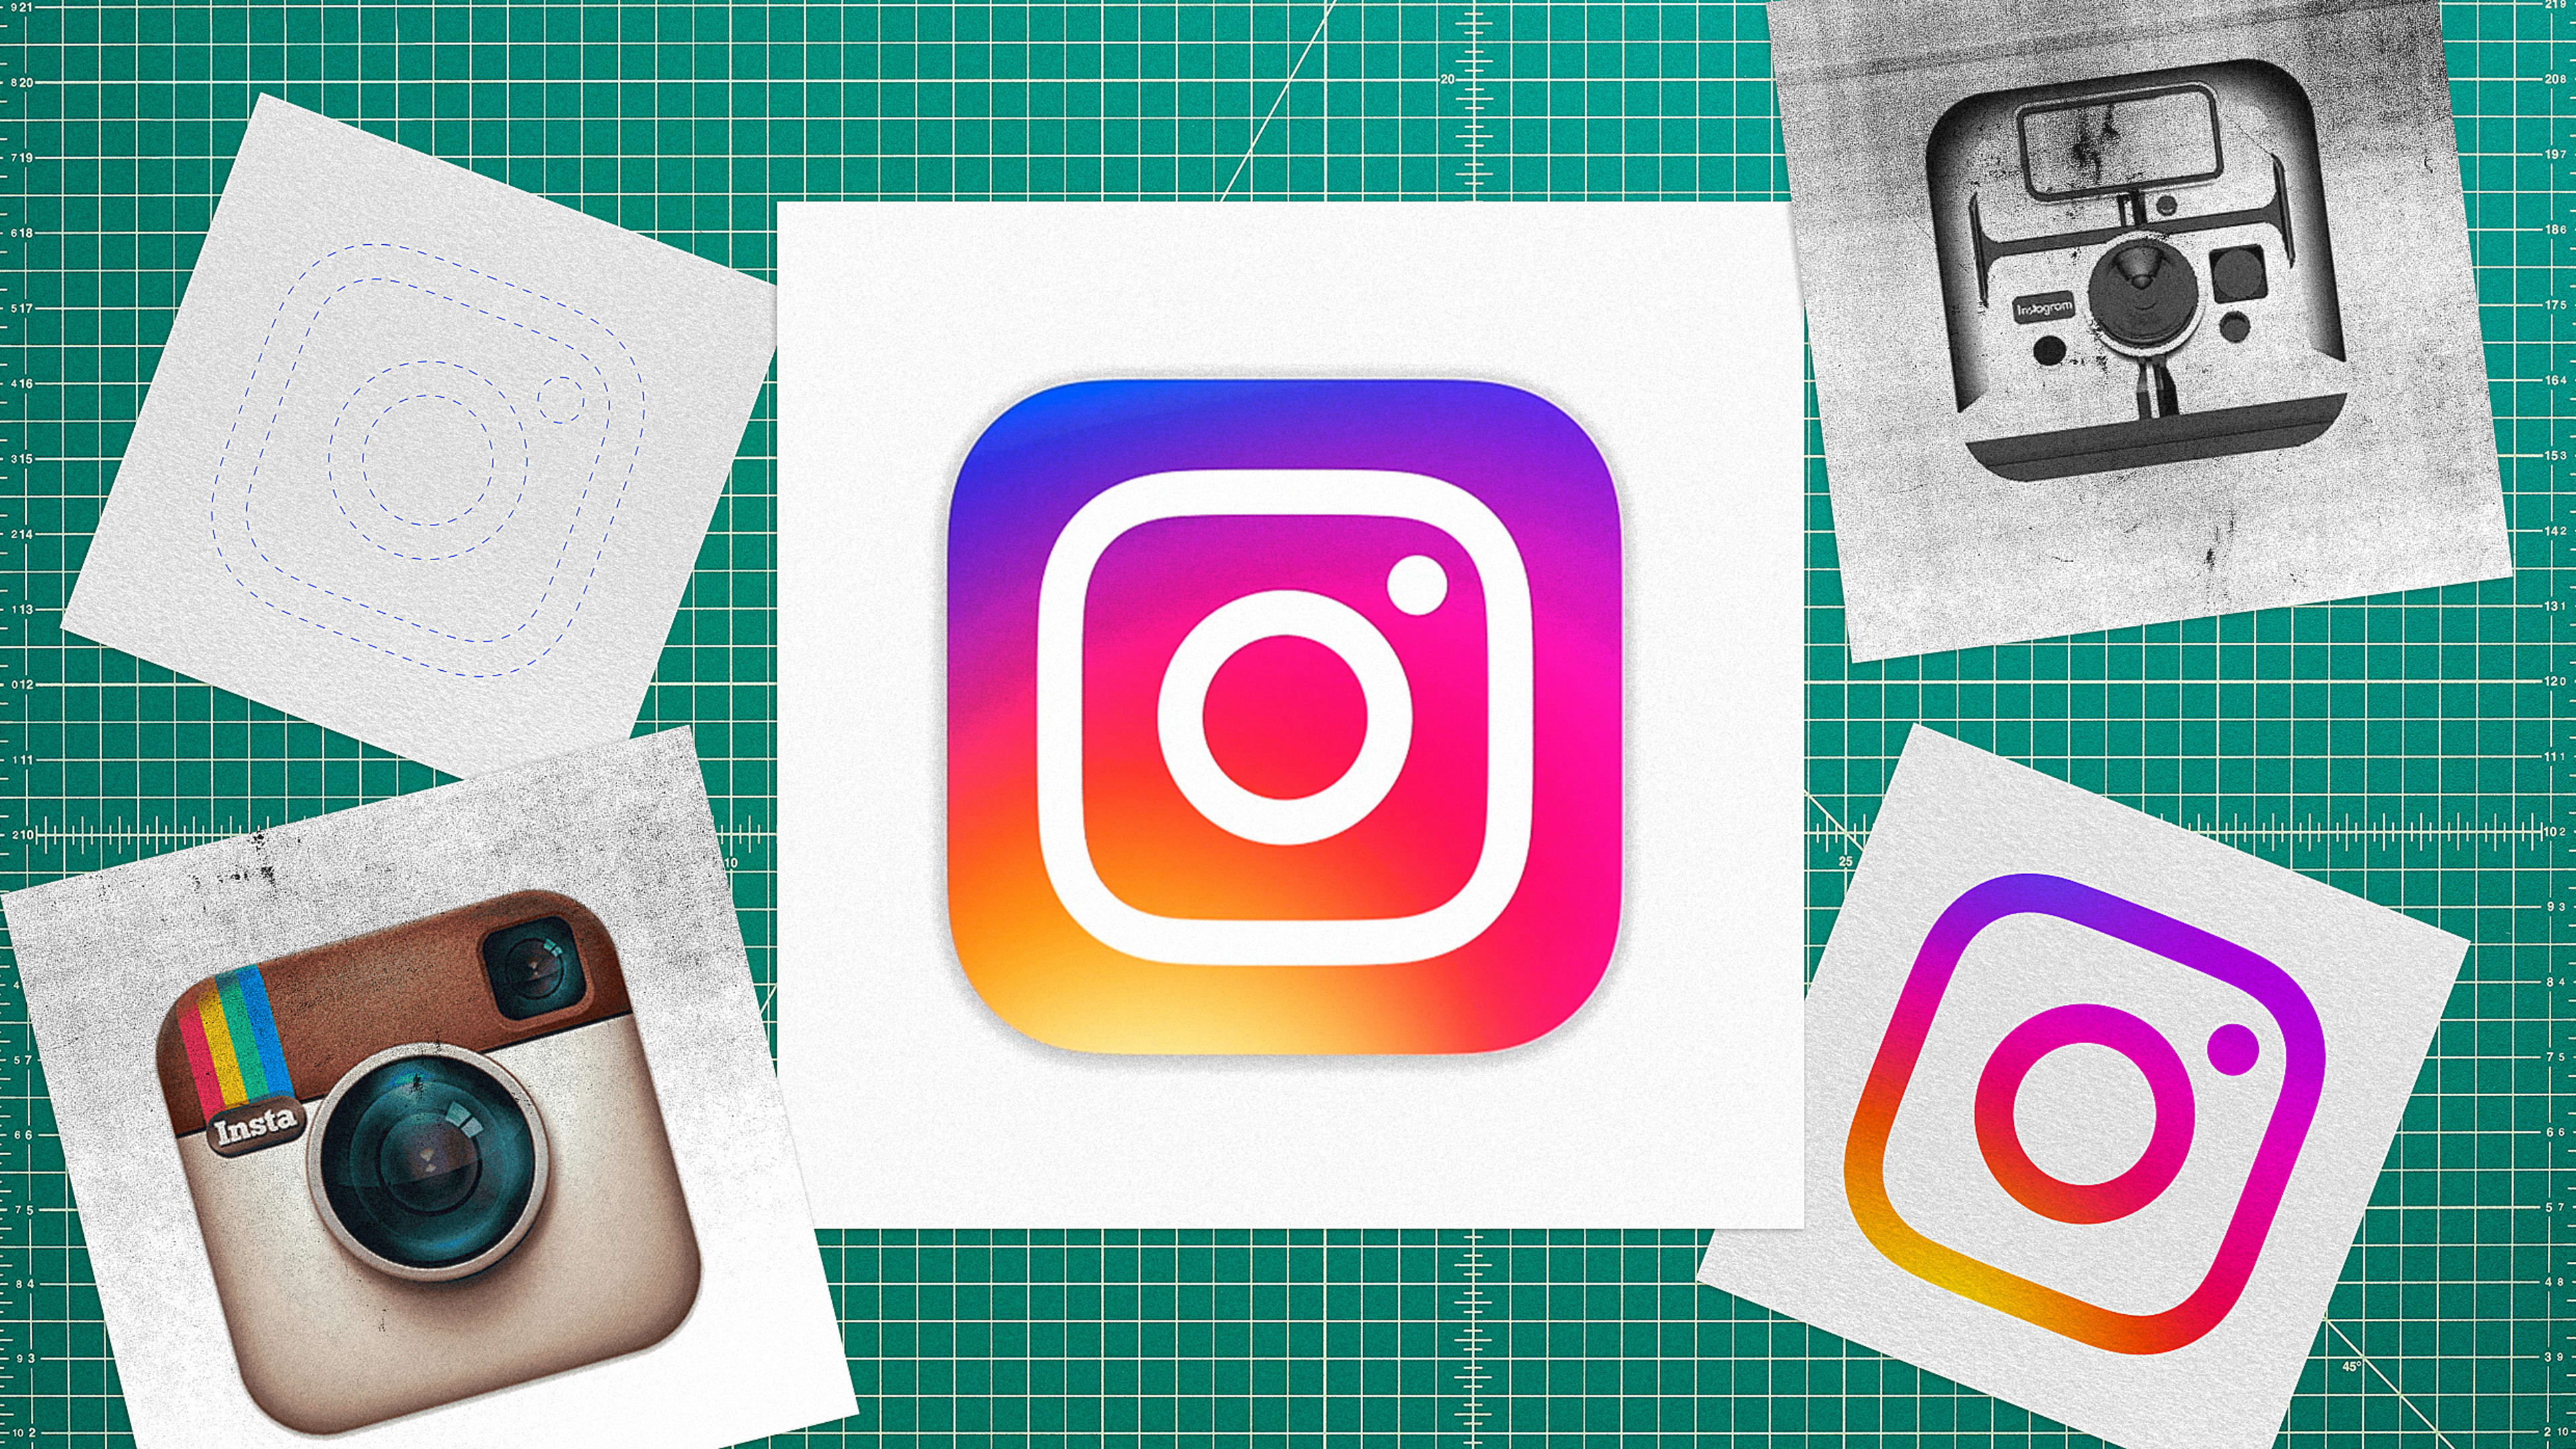 How Instagram’s logo became iconic